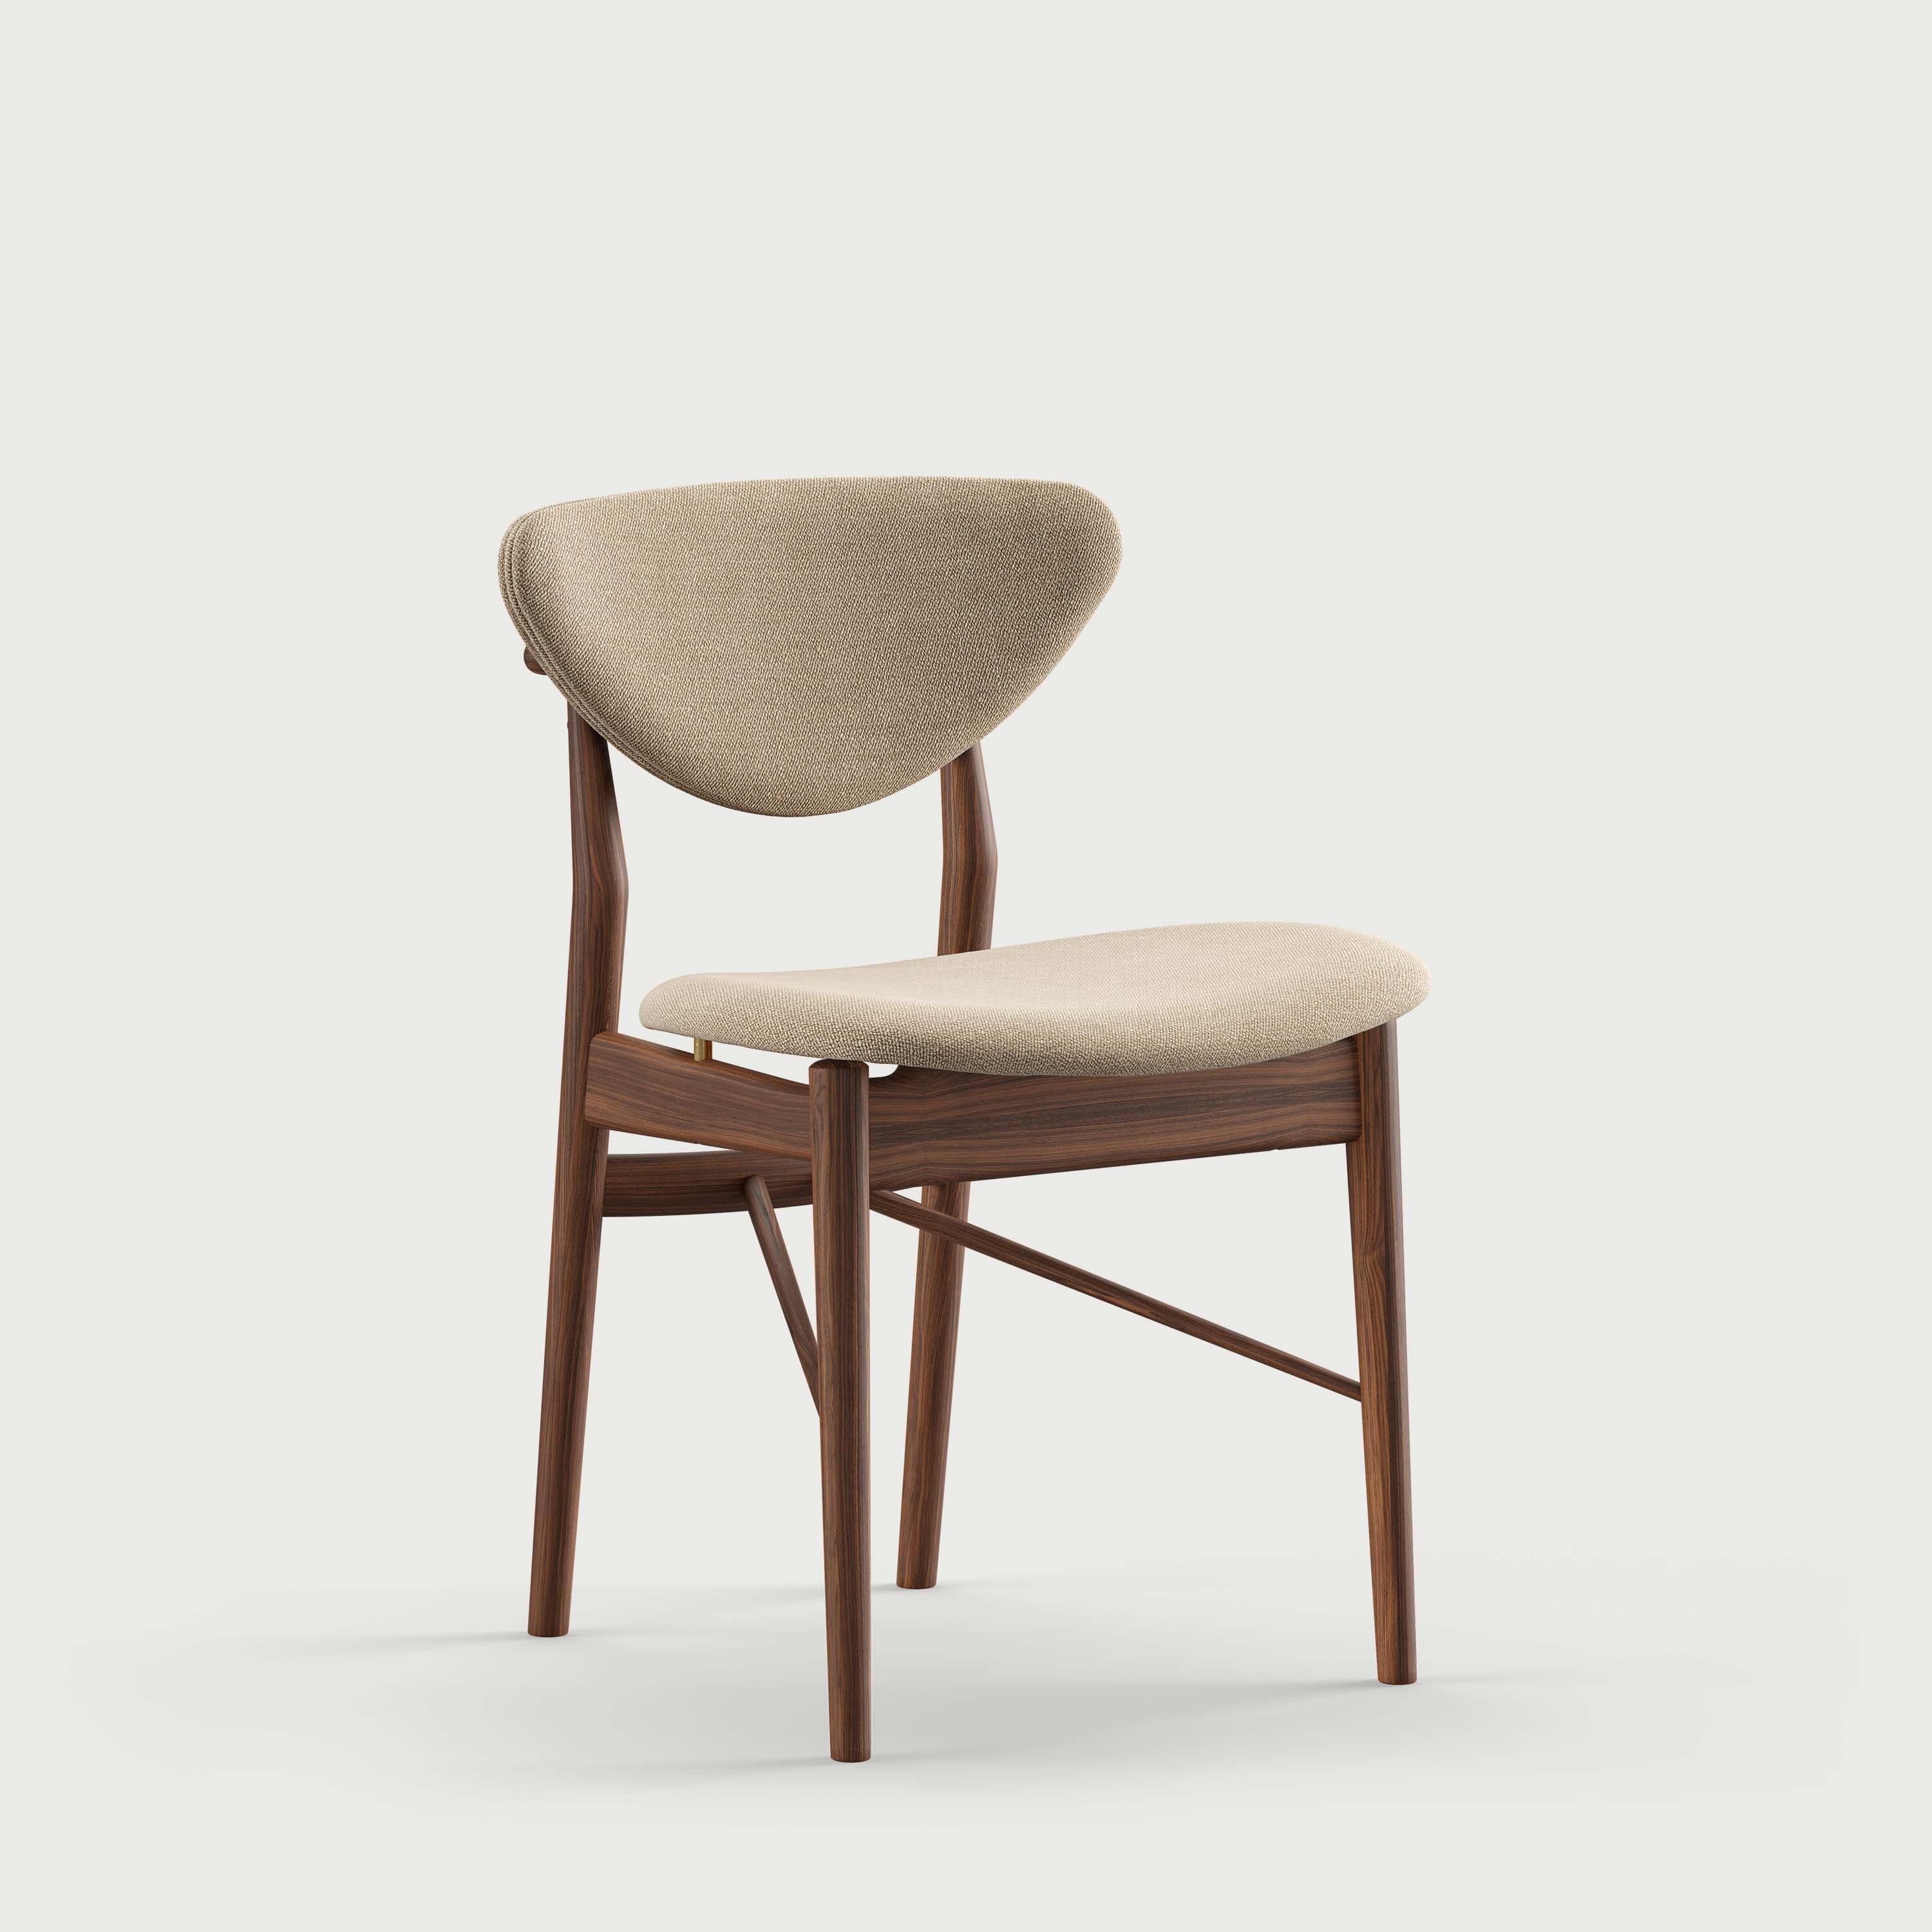 Chair designed by Finn Juhl in 1946, relaunched in 208.
Manufactured by House of Finn Juhl in Denmark.

To this day, Finn Juhl's designs are unconventional and defy expectations with subtle details. Finn Juhl himself once said that the deviation is